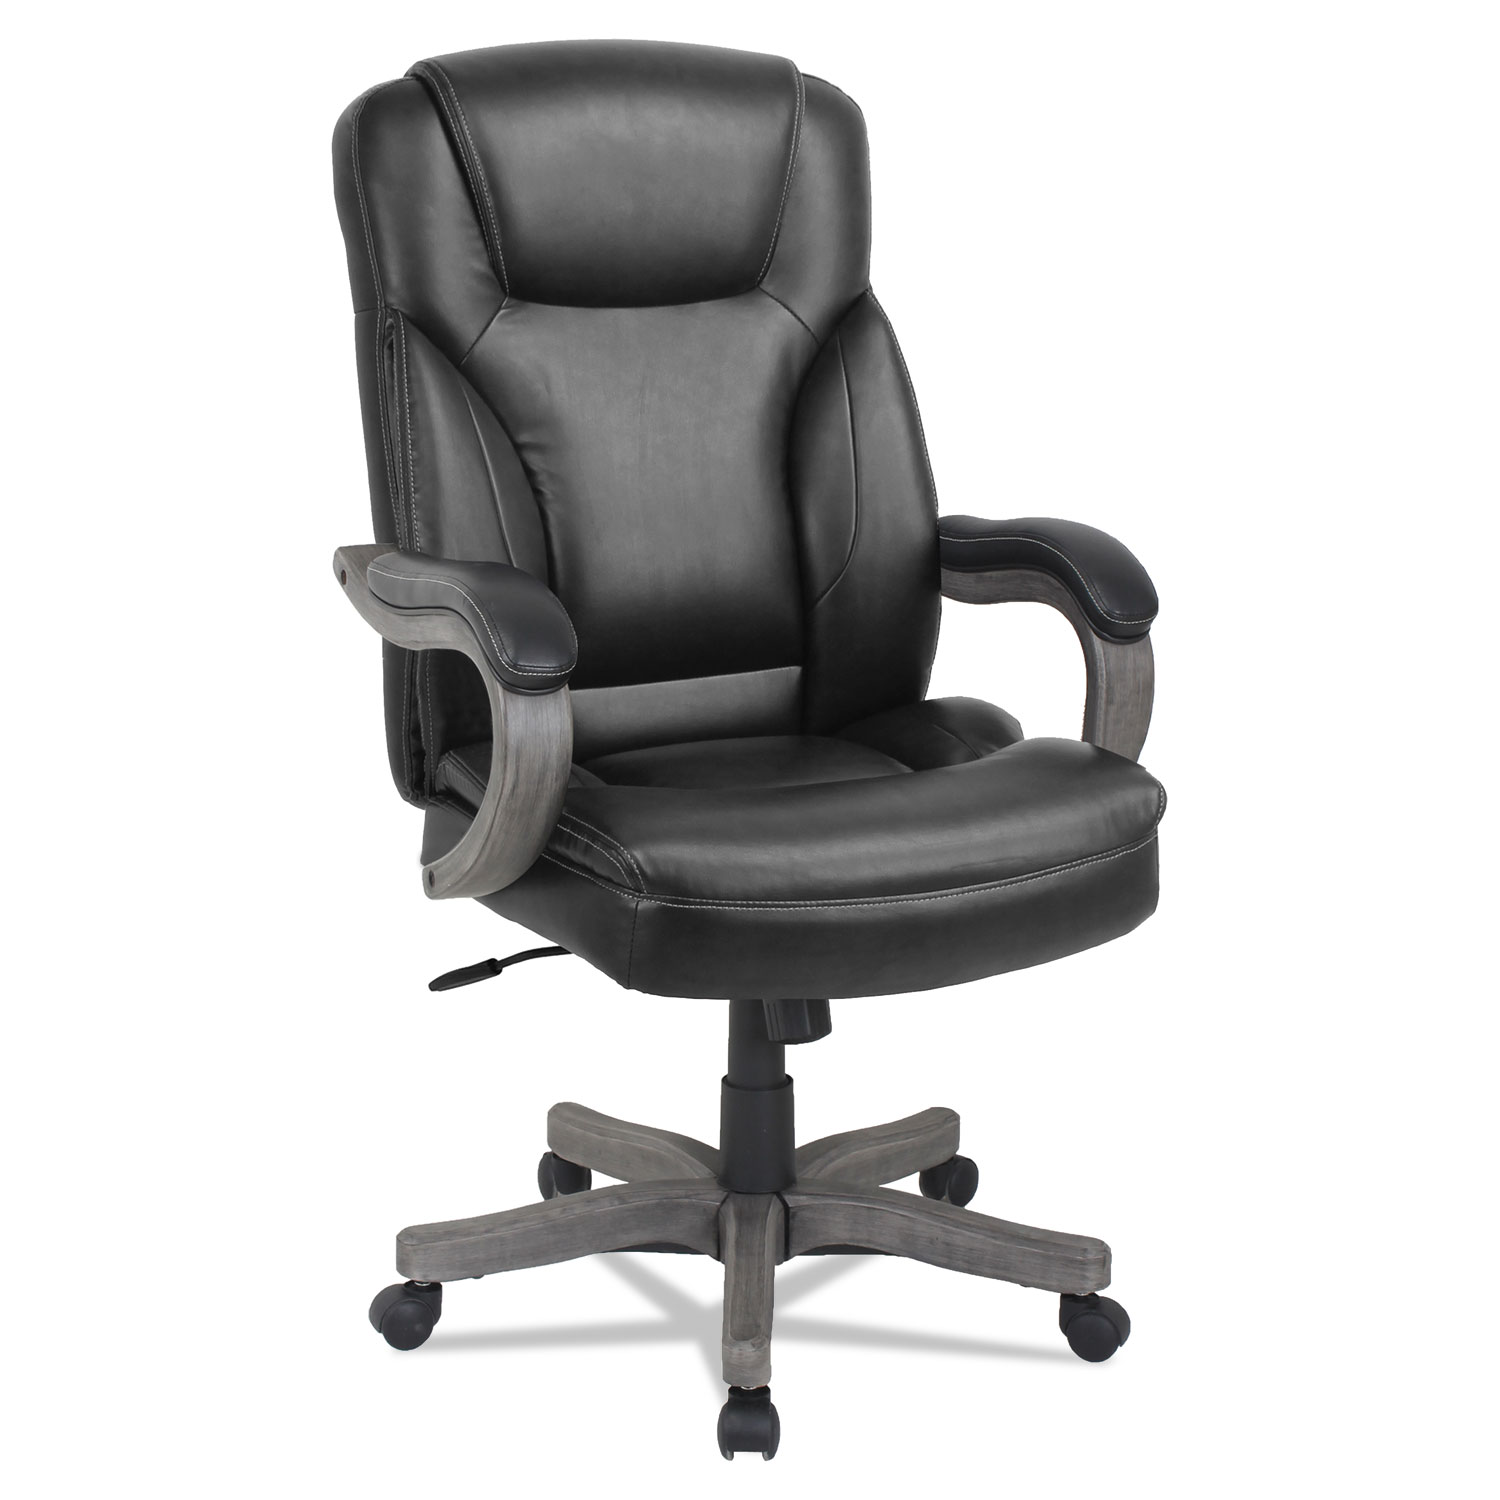 Transitional Series Executive Wood Chair, Black